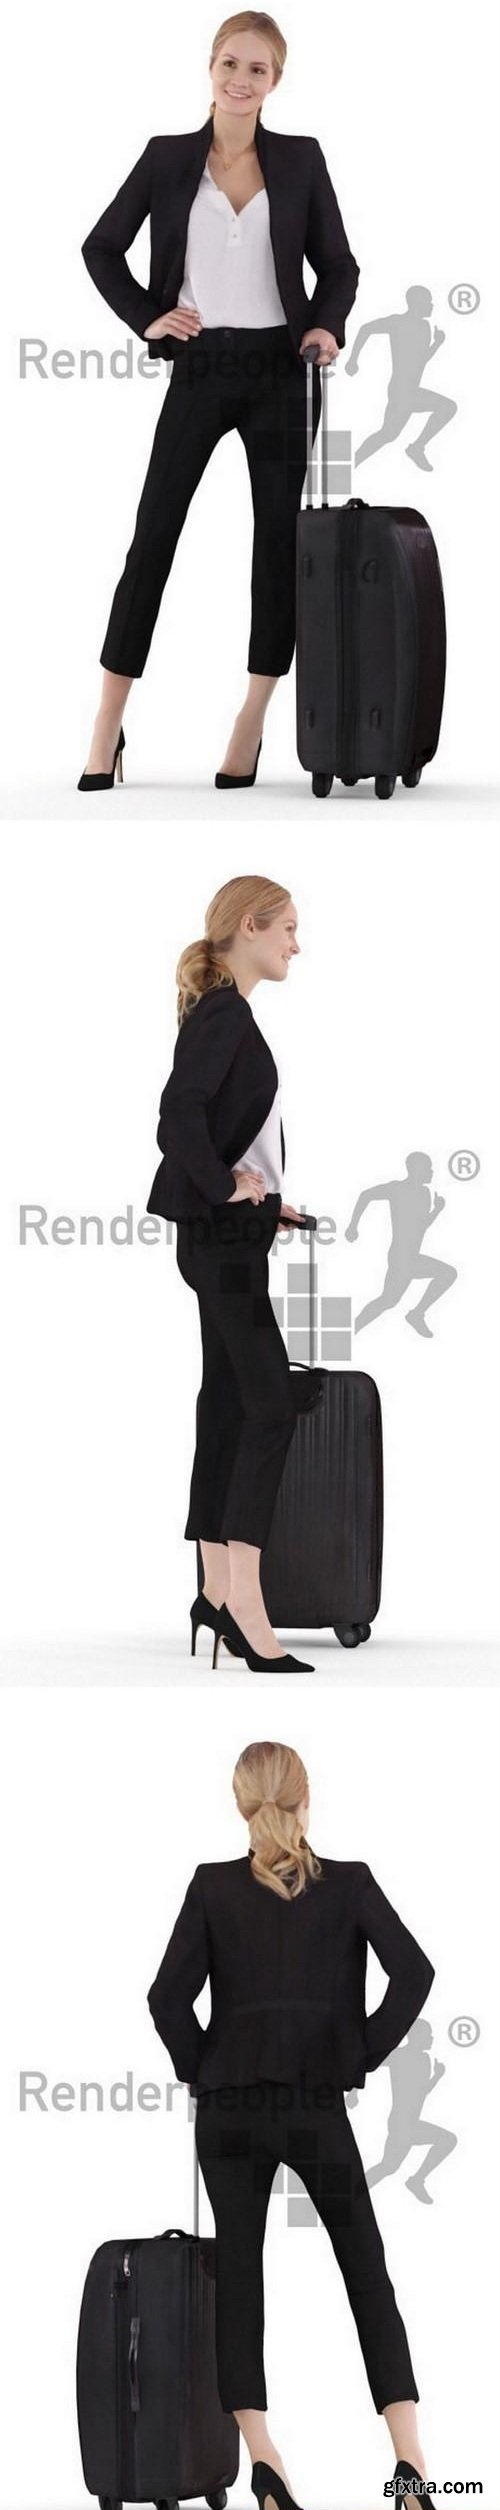 Business lady with luggage Full Body scanned 3d model